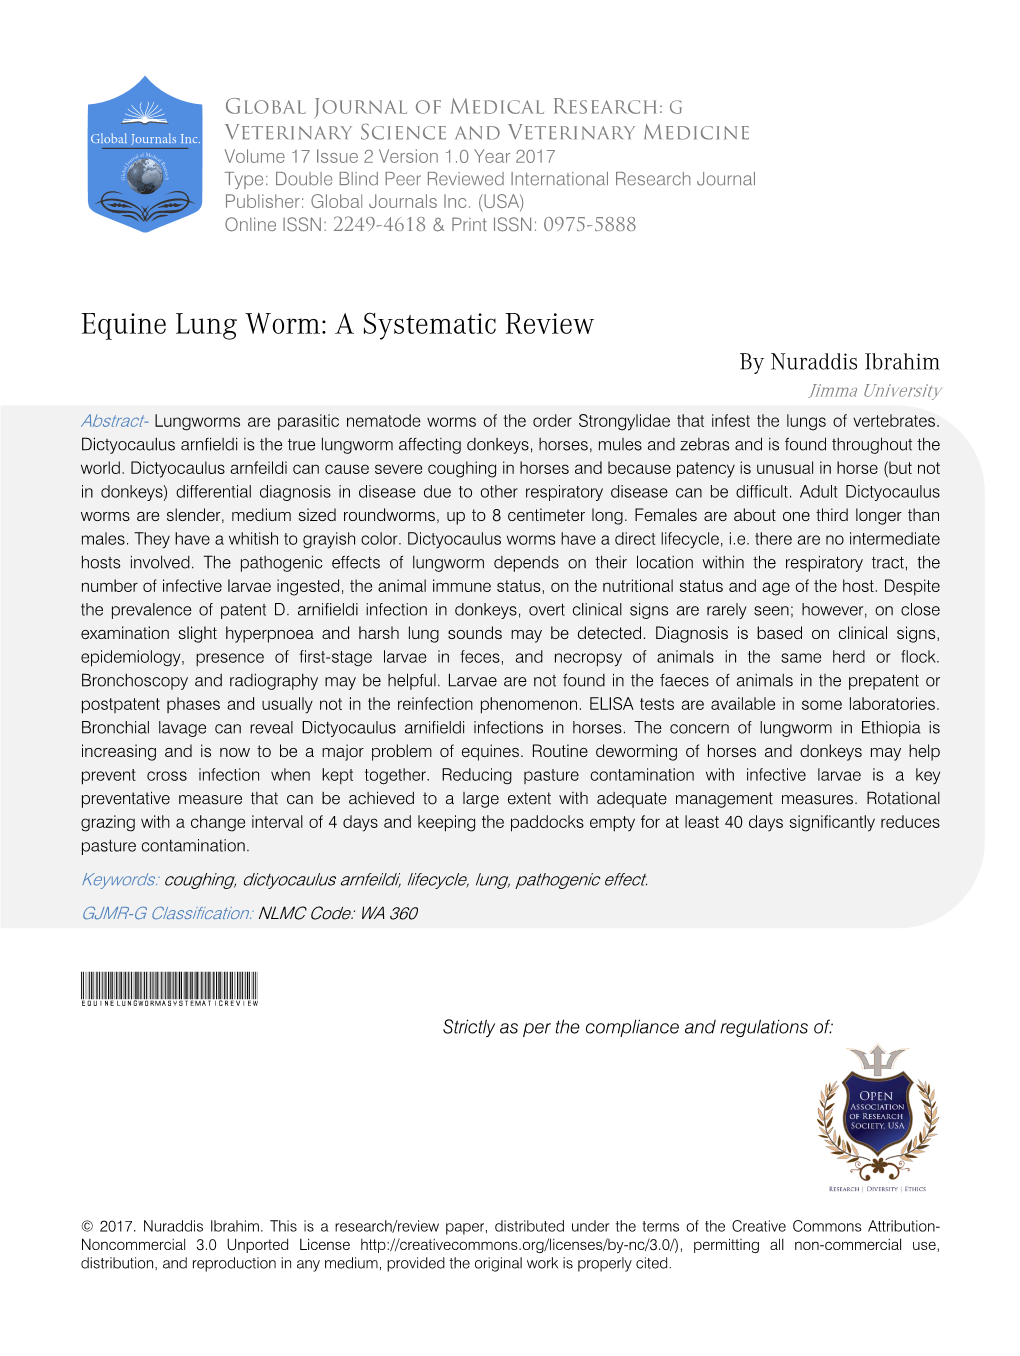 Equine Lung Worm: a Systematic Review